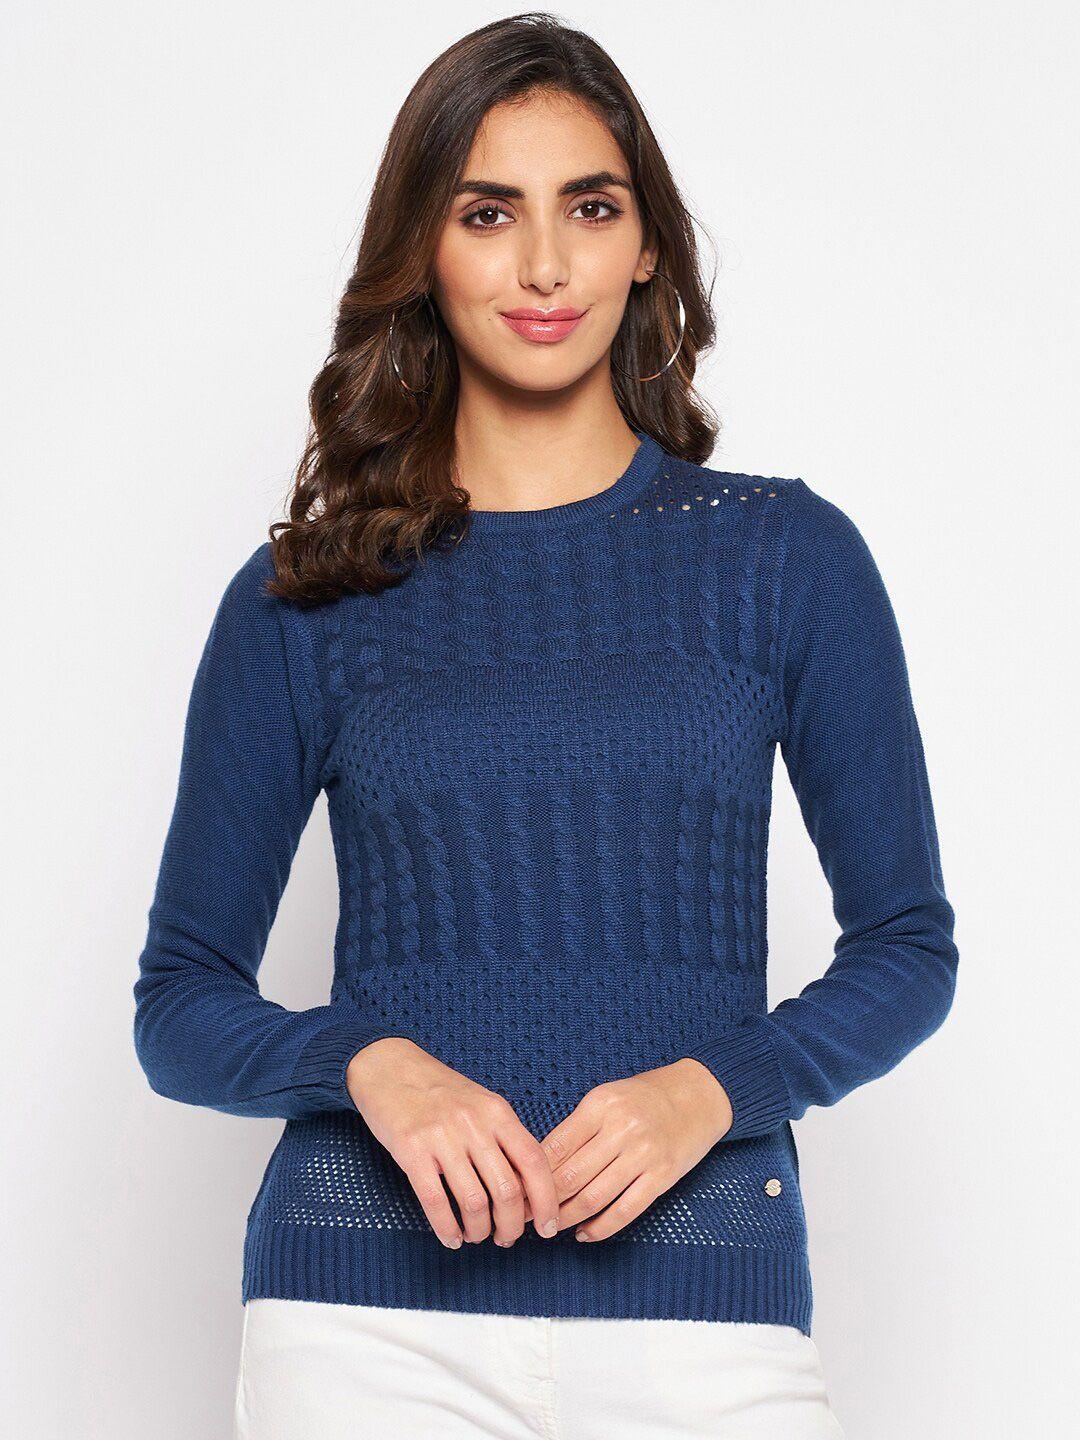 crozo-by-cantabil-women-acrylic-blue-cable-knit-pullover